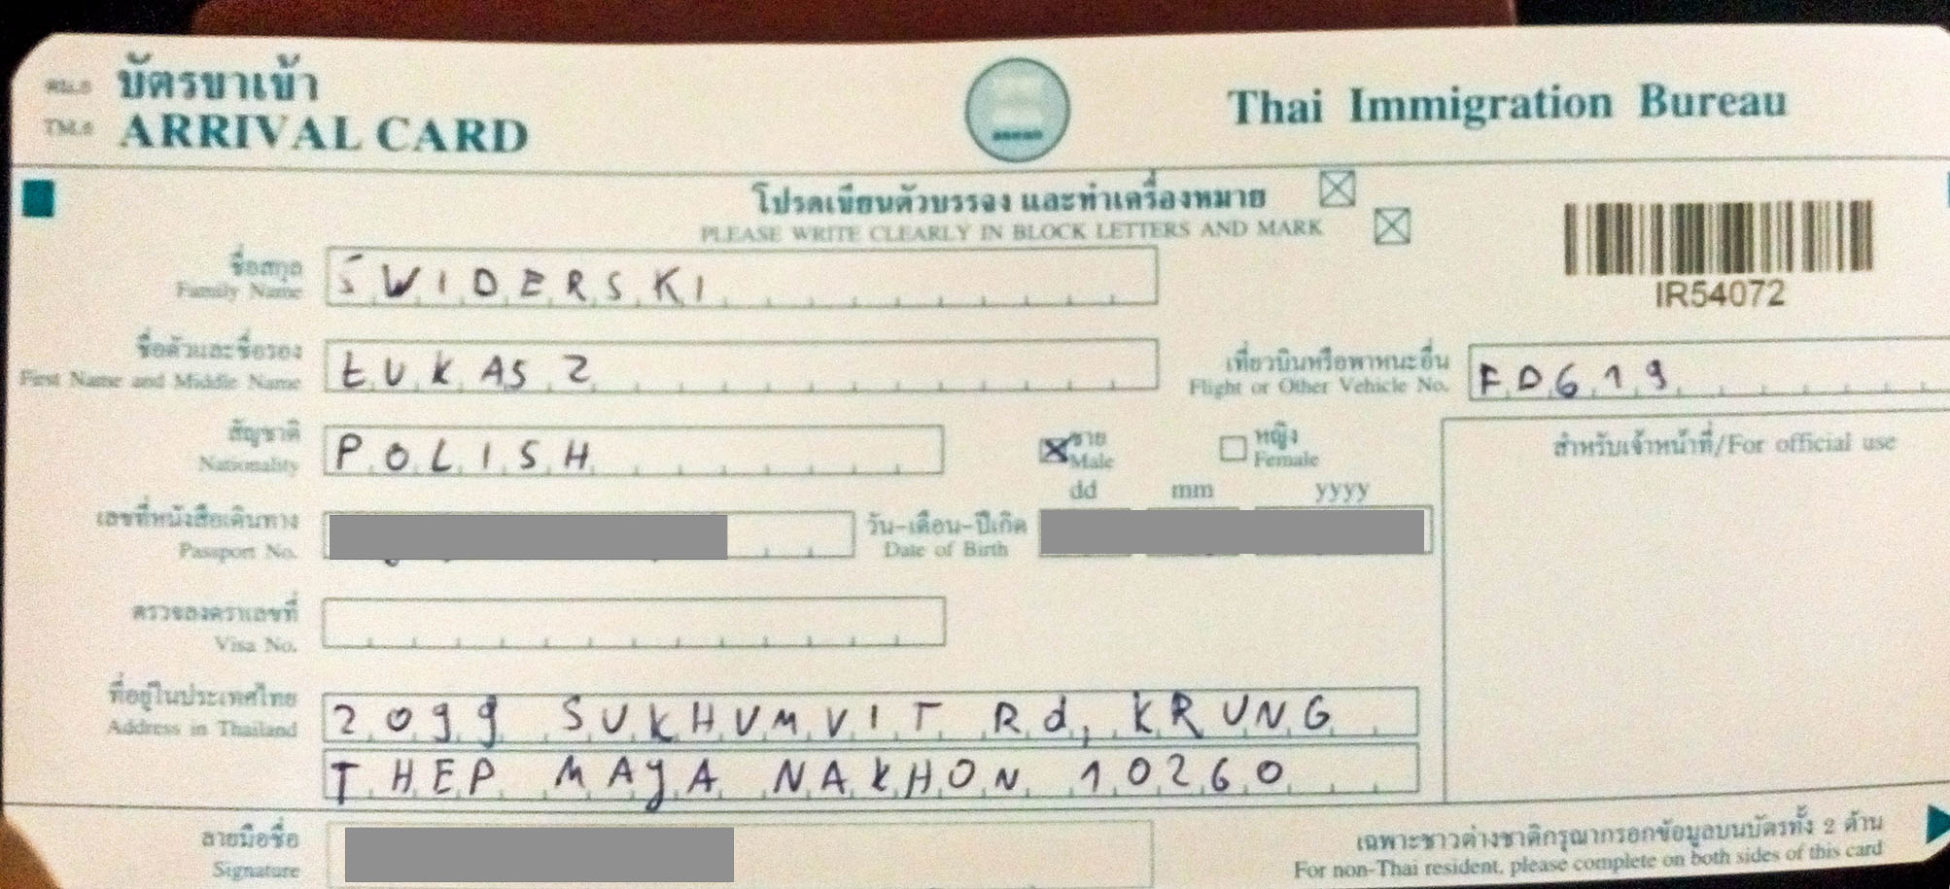 Old Arrival Card